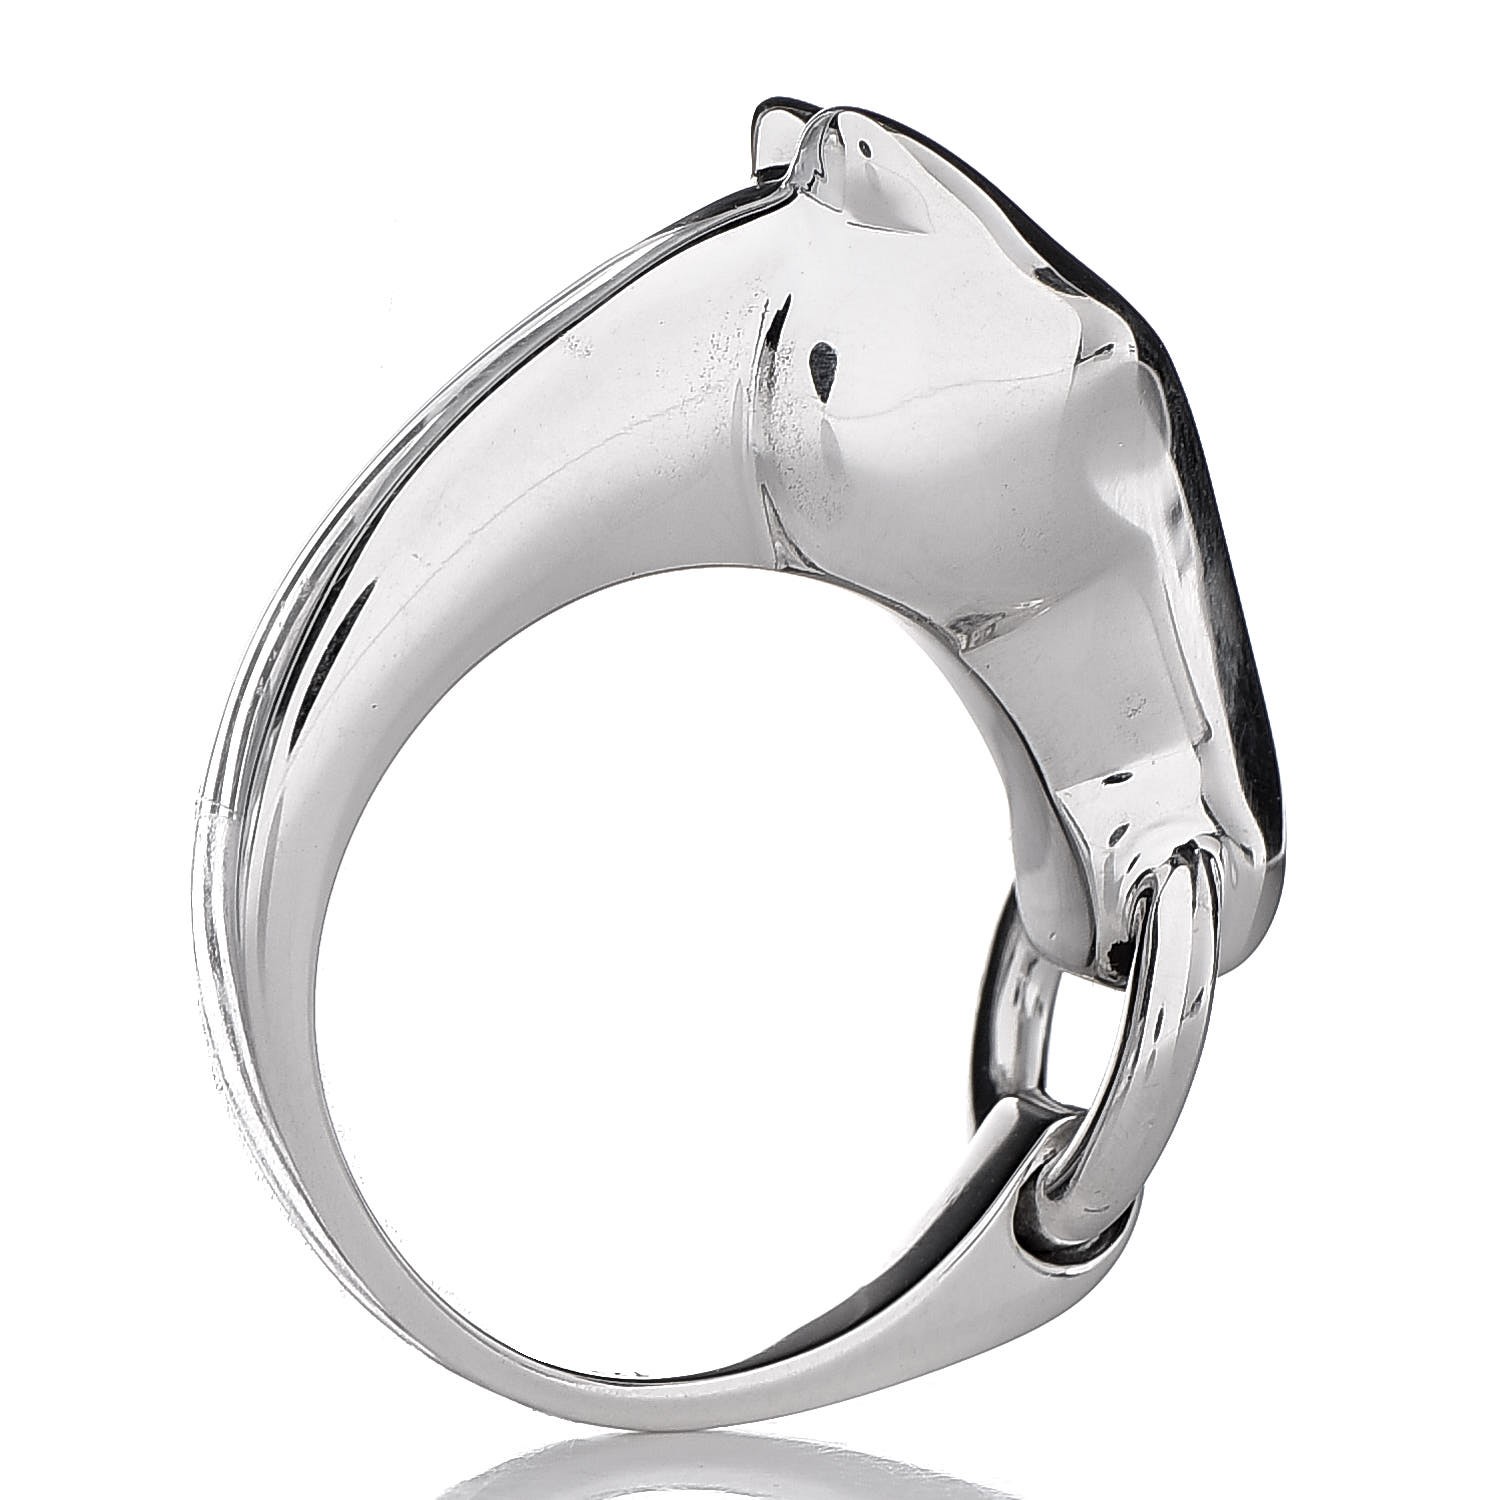 HERMES Sterling Silver Small Galop Ring 56 7.75 259338